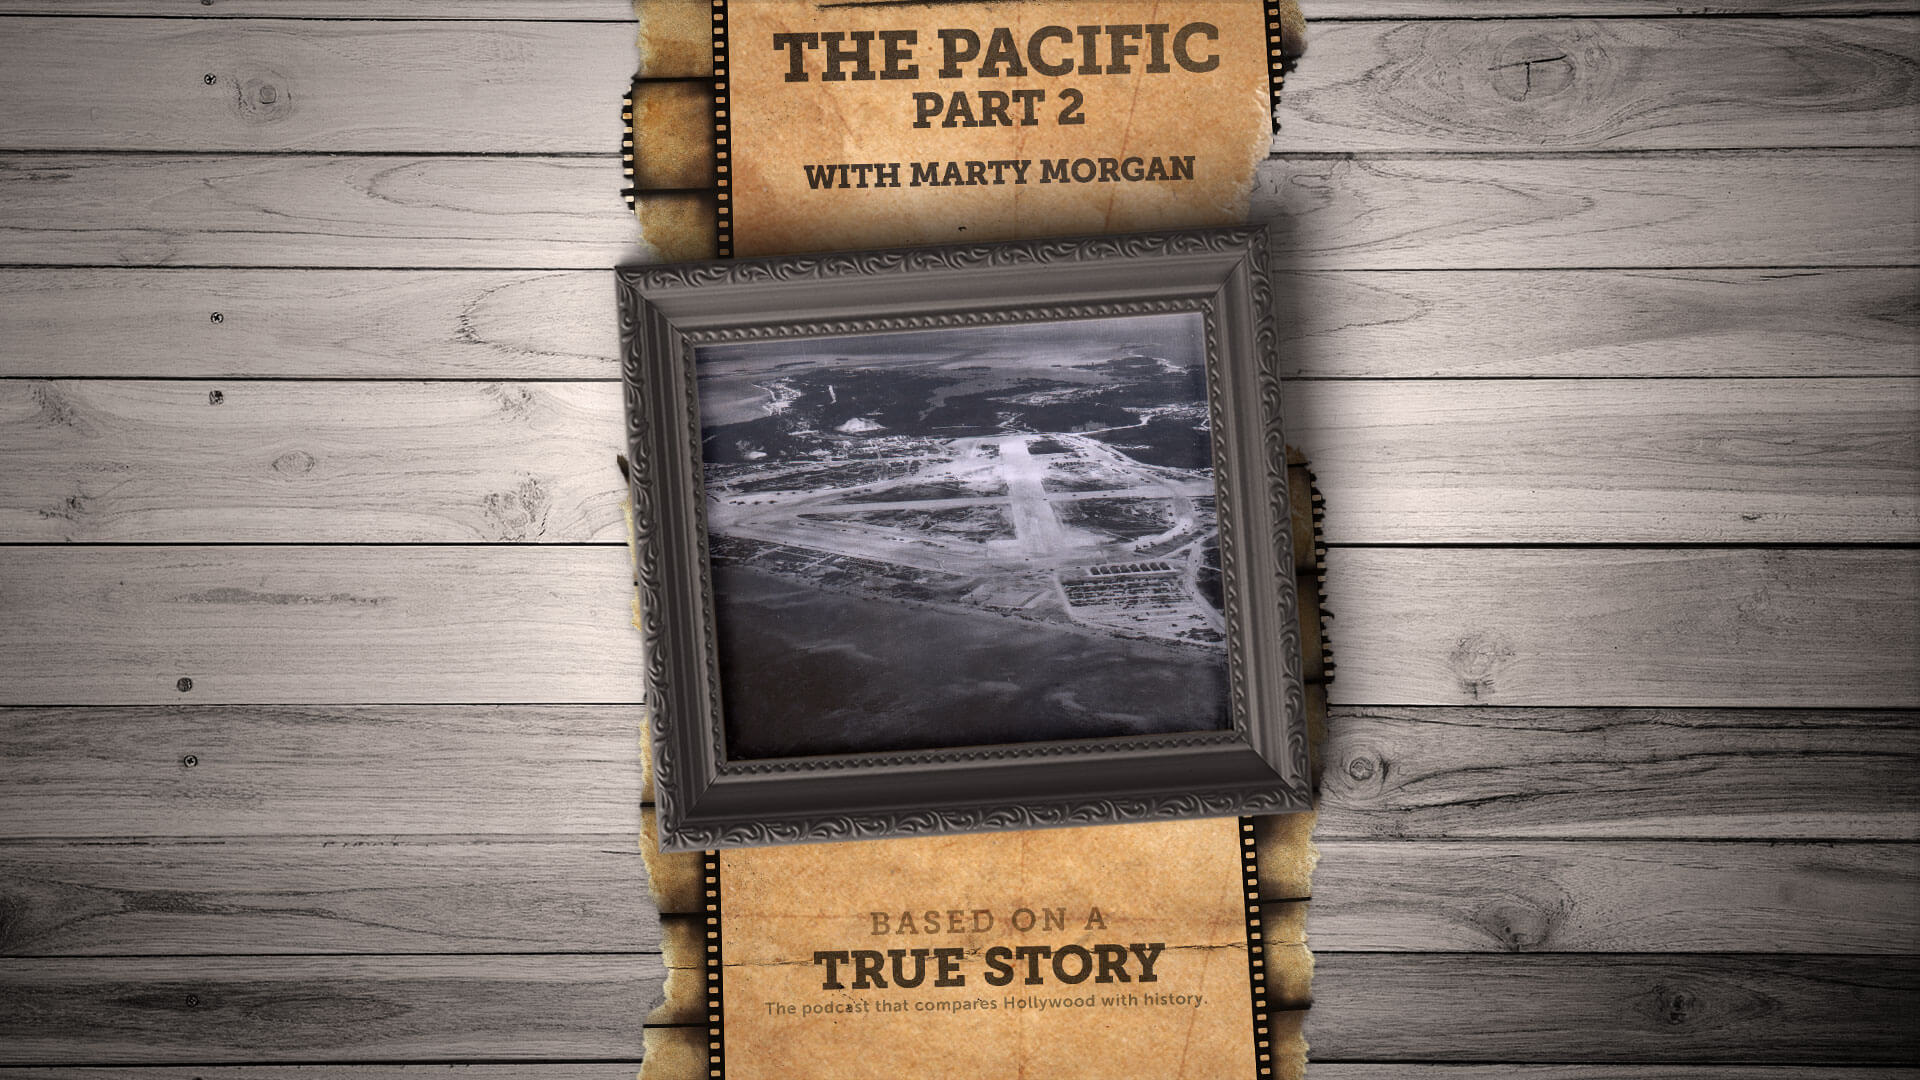 The true story behind The Pacific (Part 2)